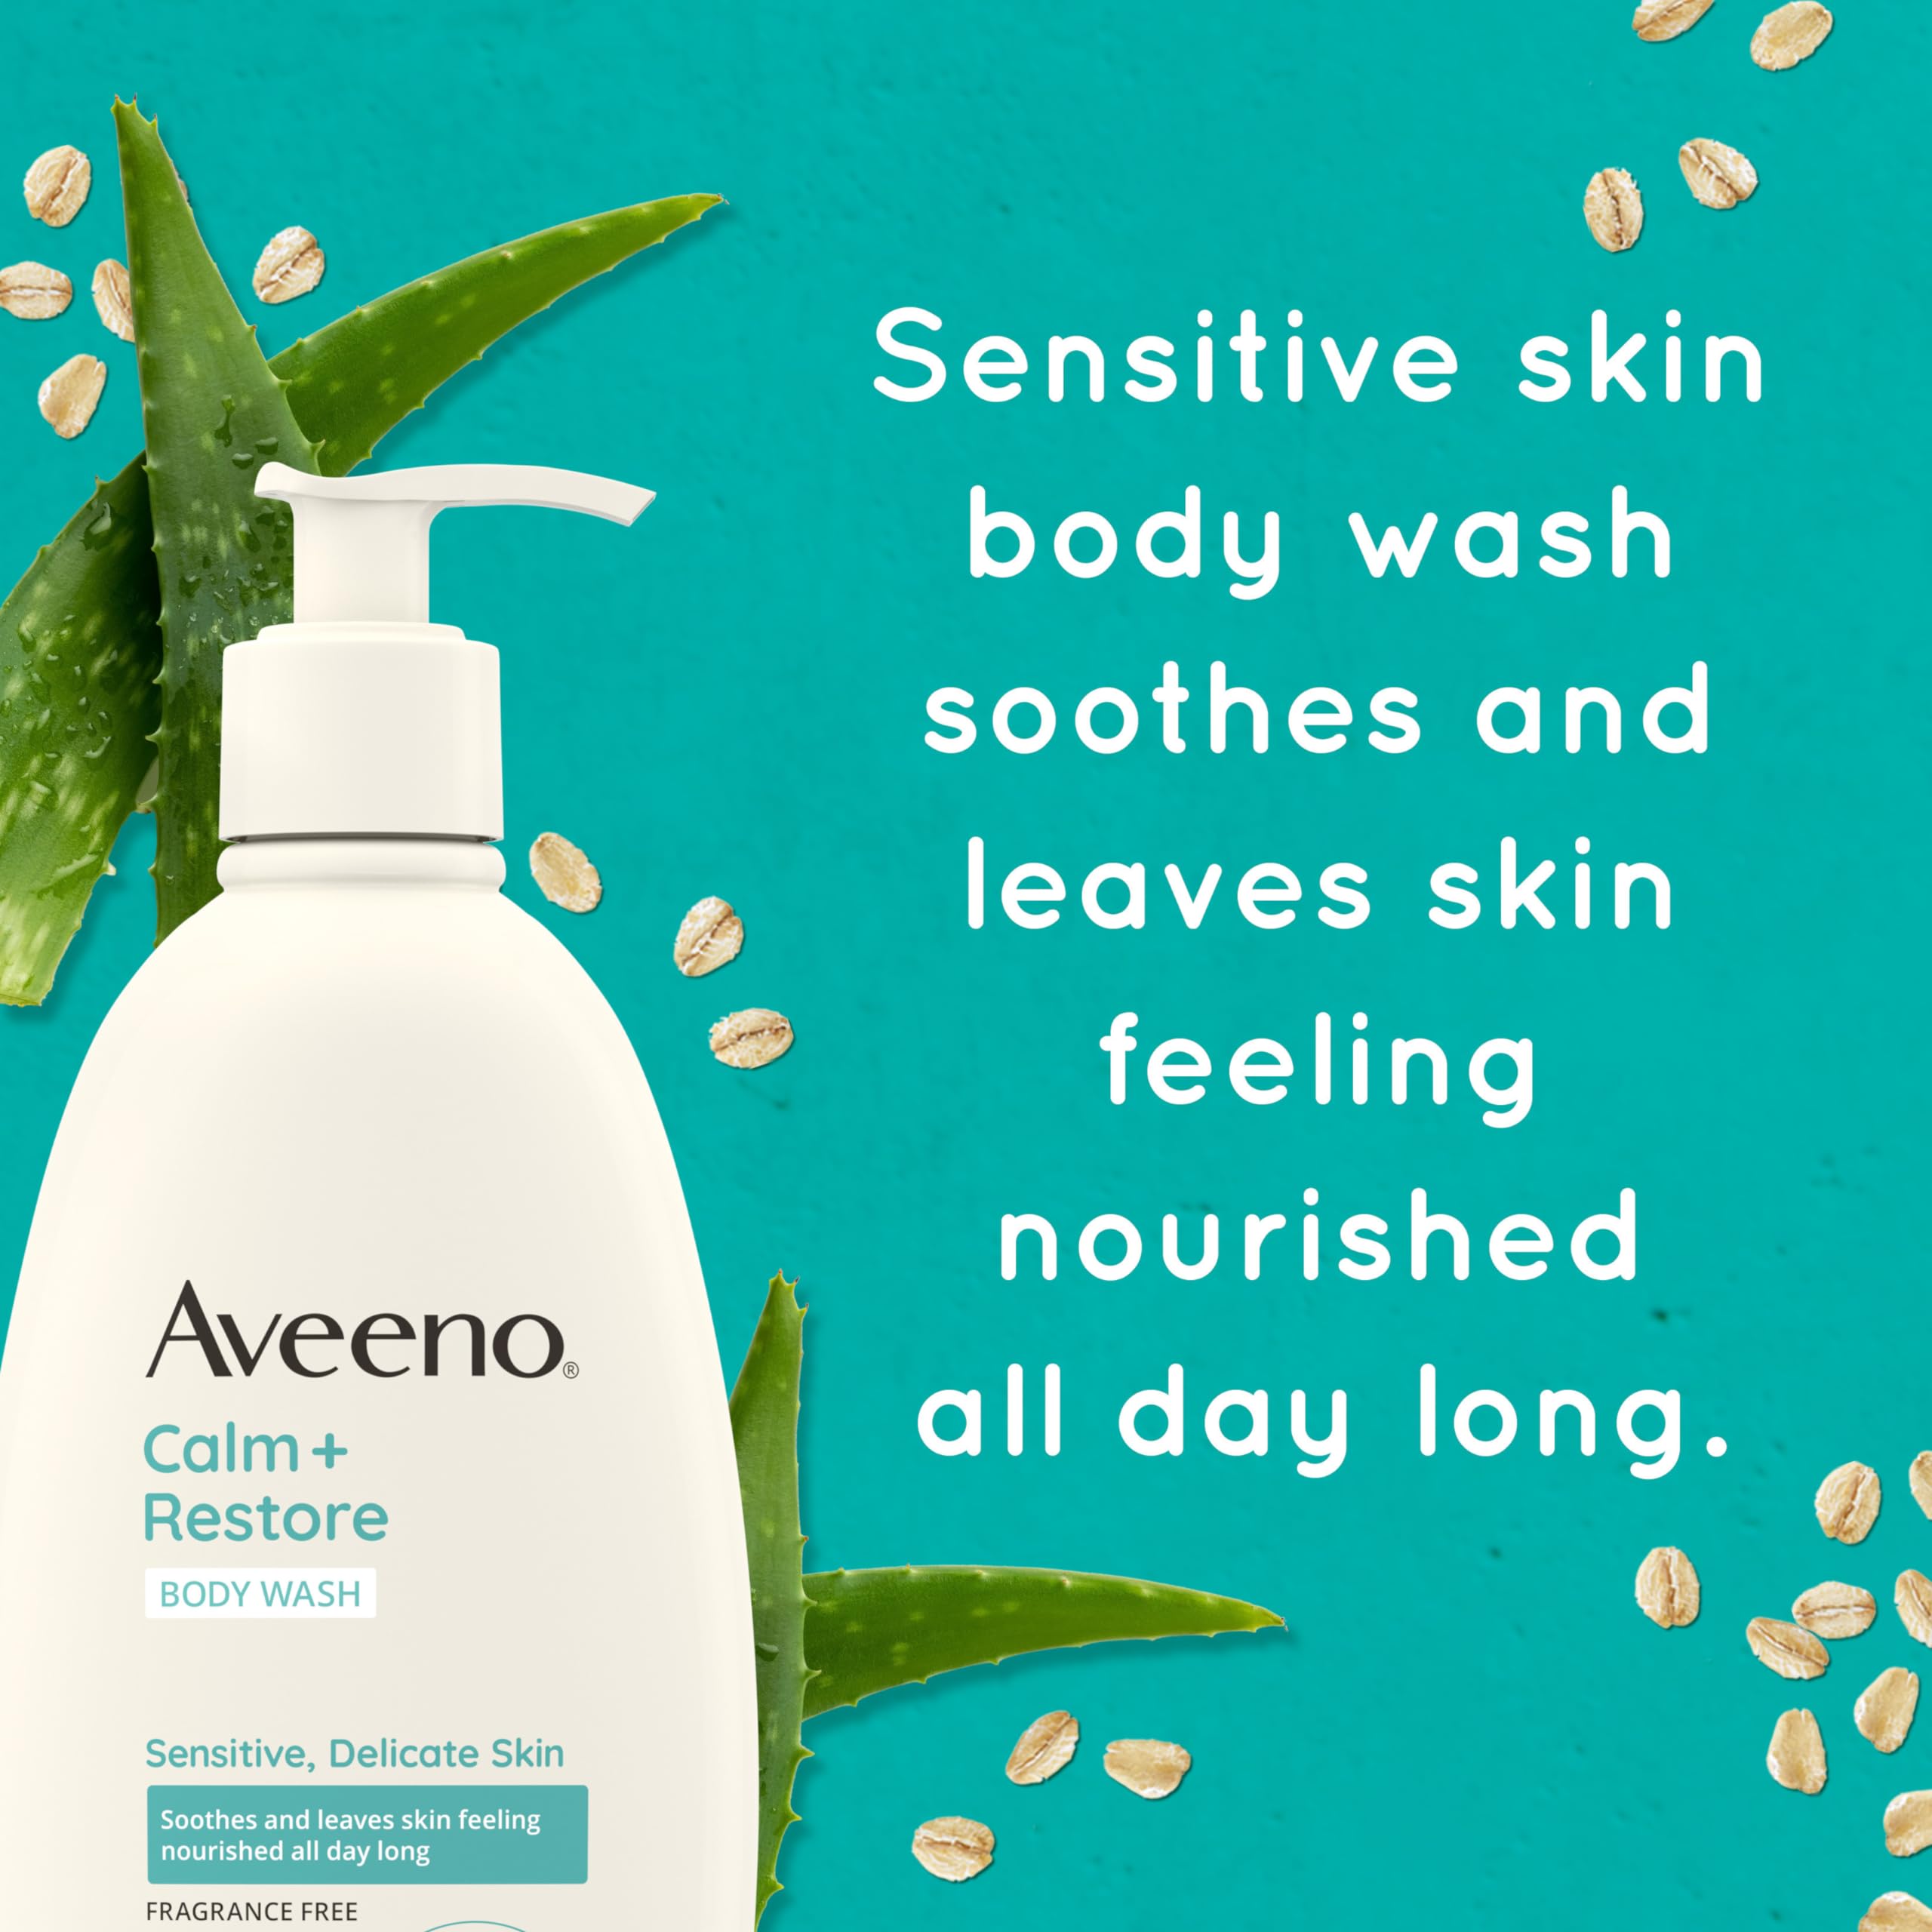 Aveeno Calm + Restore Daily Body Wash for Sensitive, Delicate Skin, Gentle Cleanser with Oat, Aloe & Pro-Vitamin B5 Soothes & Leaves Skin Feeling Nourished, Fragrance Free, 18 fl. oz